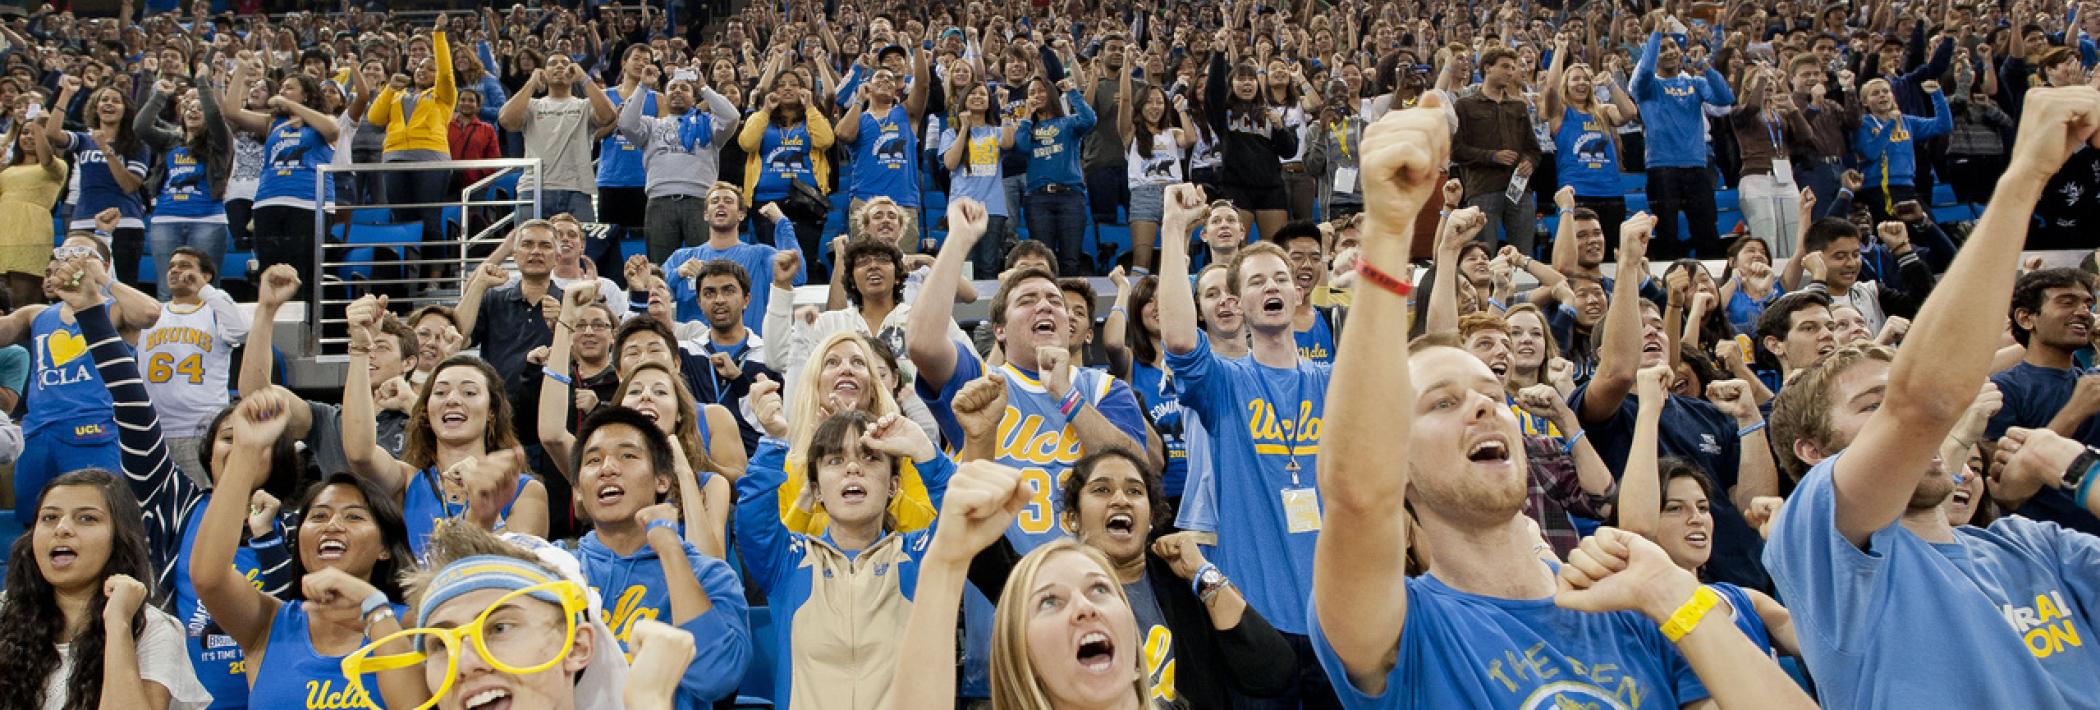 Bruin fans at athletic event